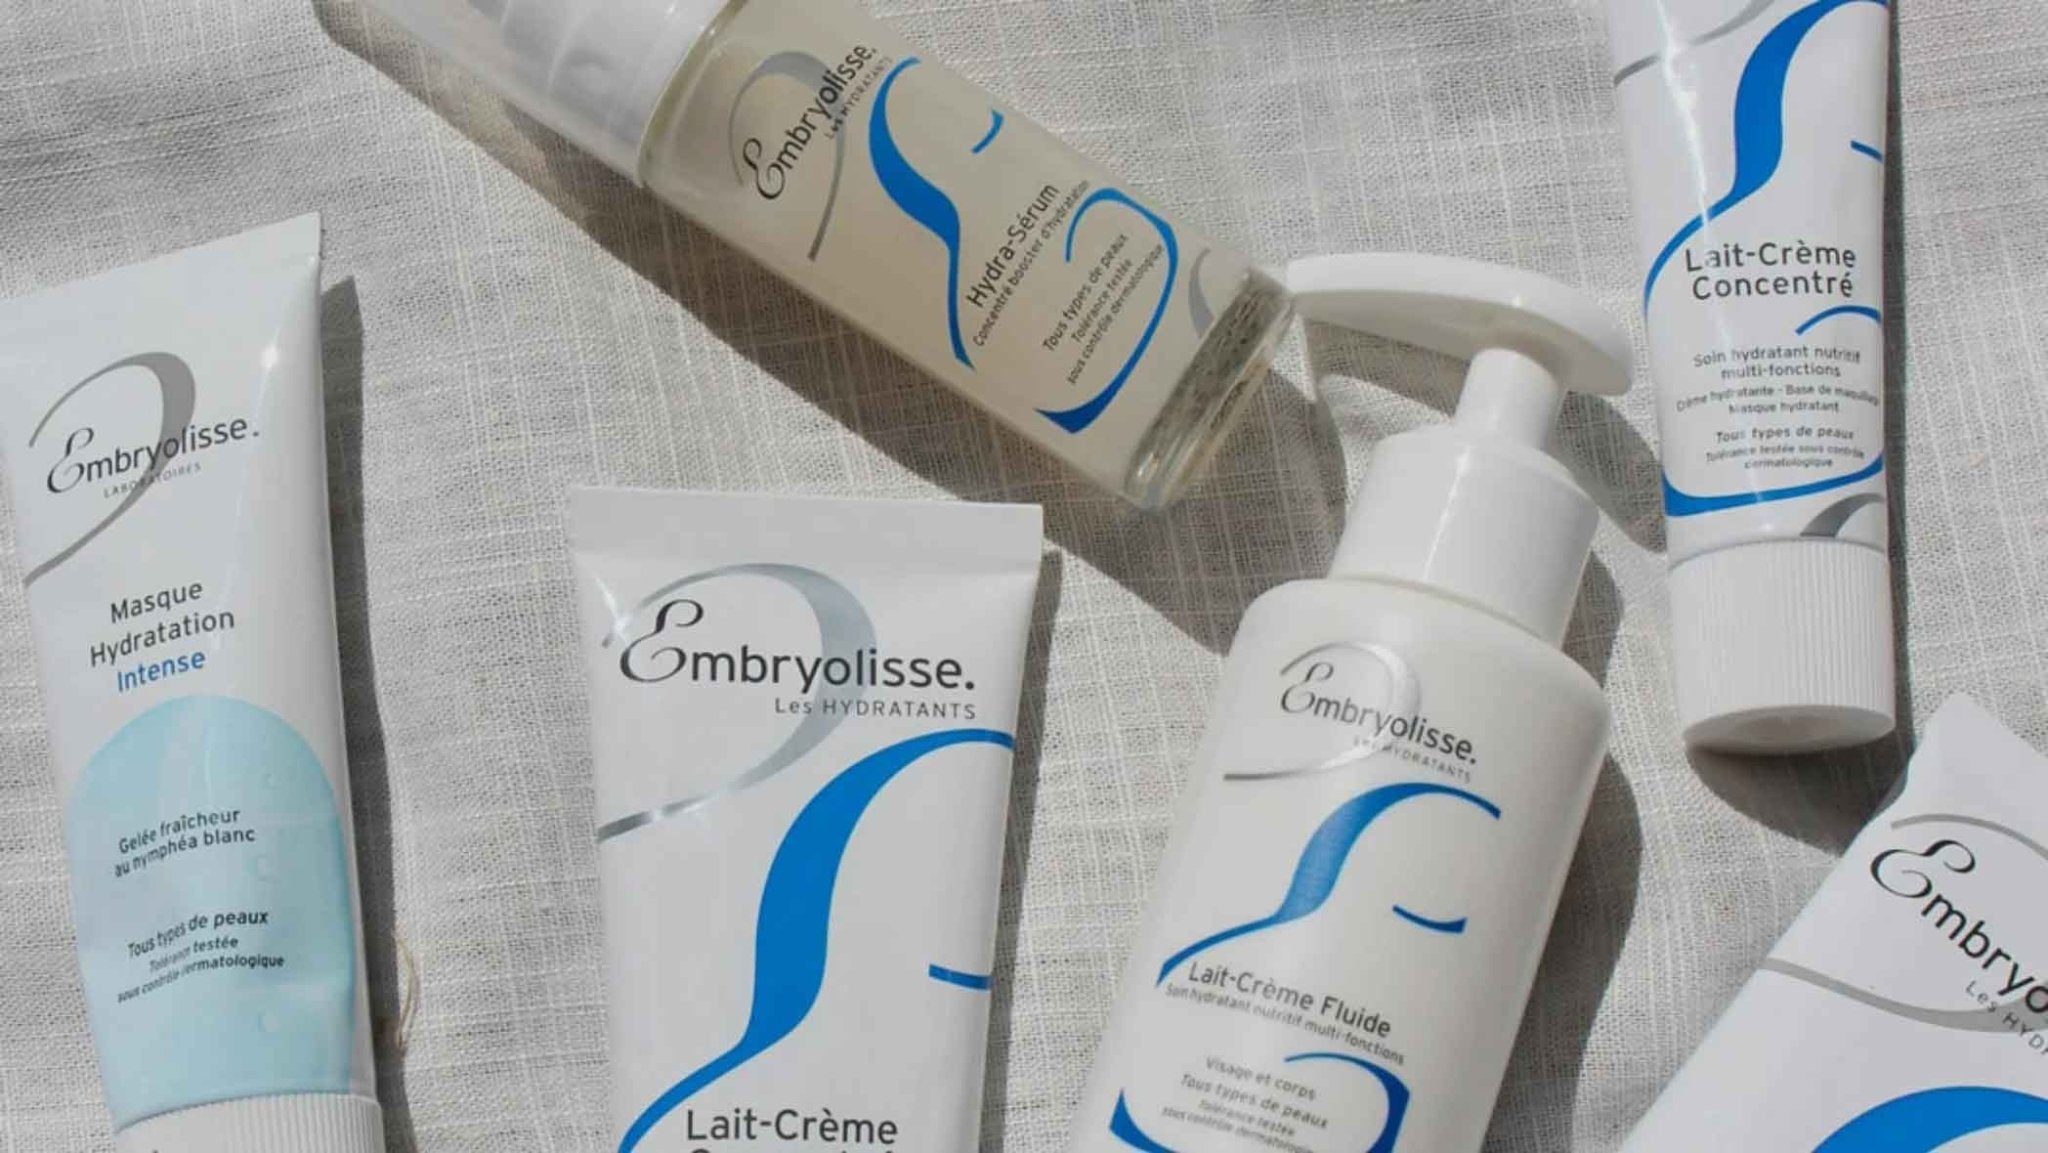 Laboratoires Embryolisse - French Beauty Co.